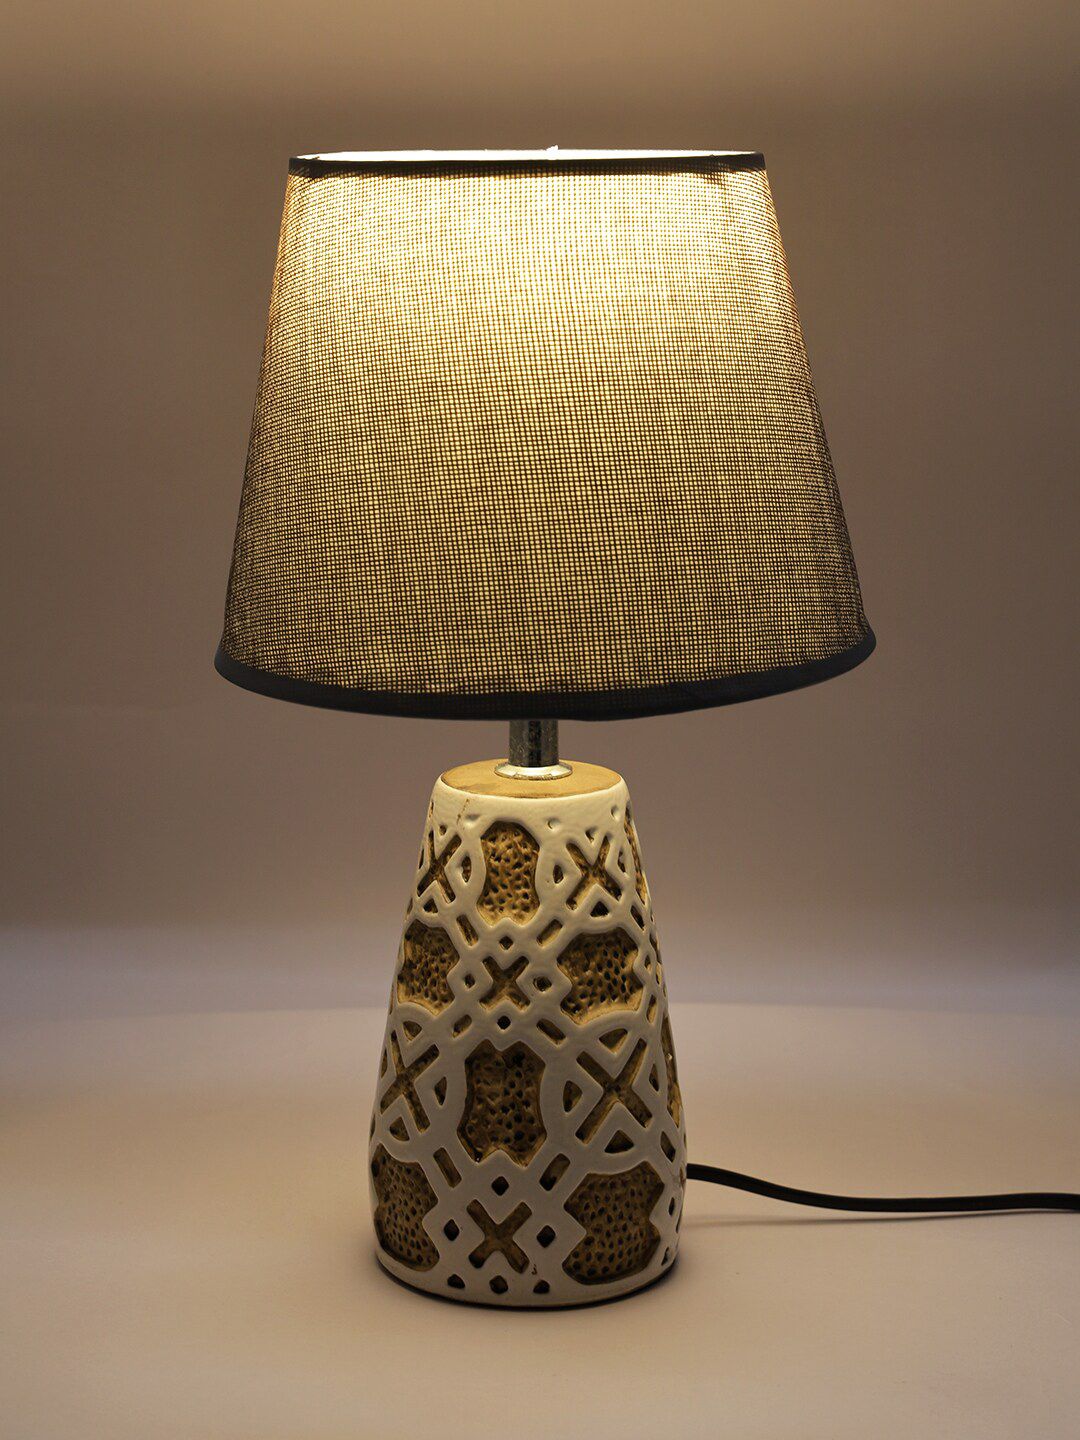 TAYHAA Brown & White Ceramic Table Lamp with Shade Price in India